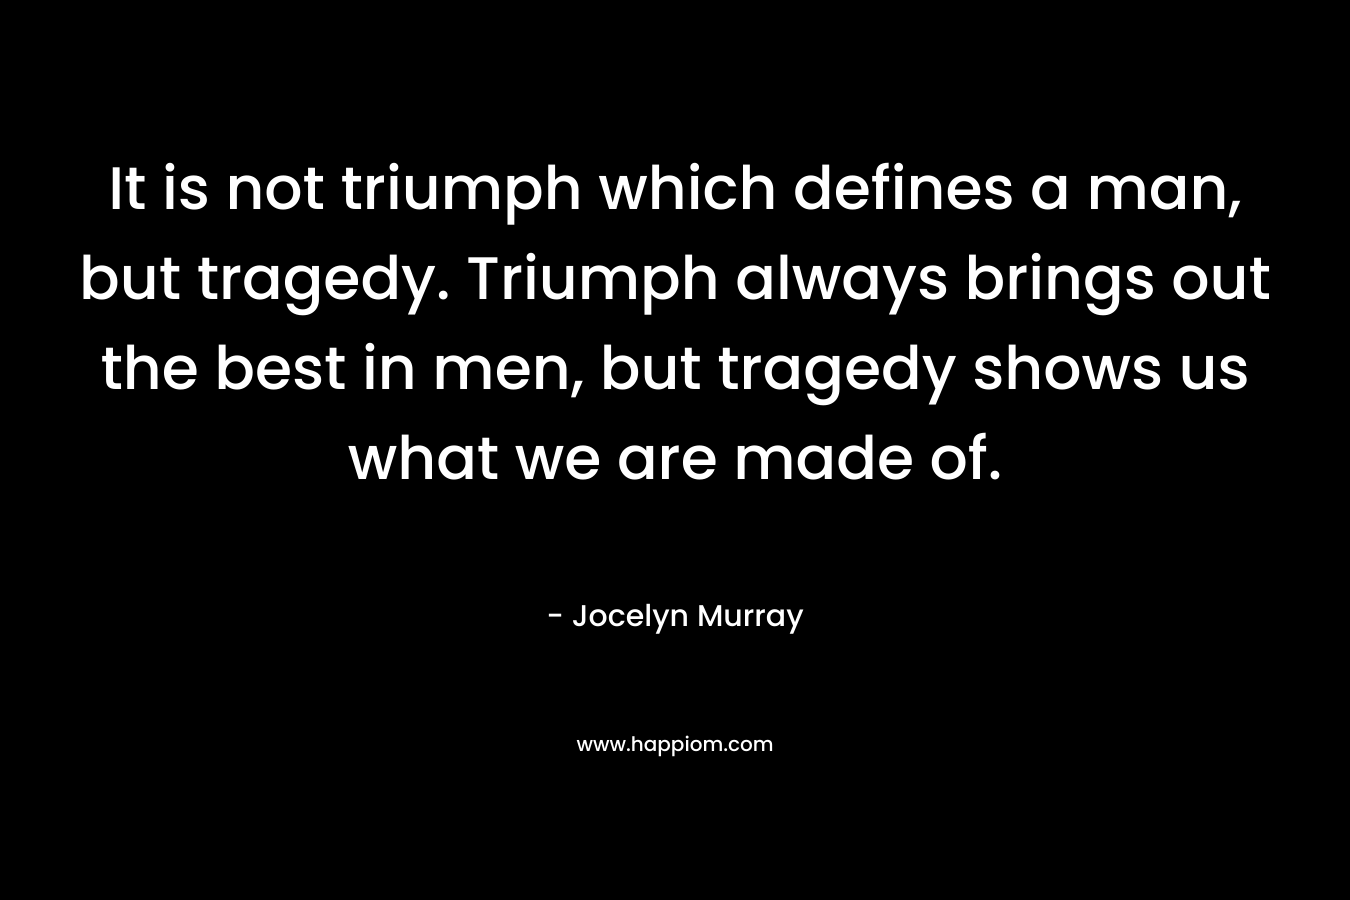 It is not triumph which defines a man, but tragedy. Triumph always brings out the best in men, but tragedy shows us what we are made of.